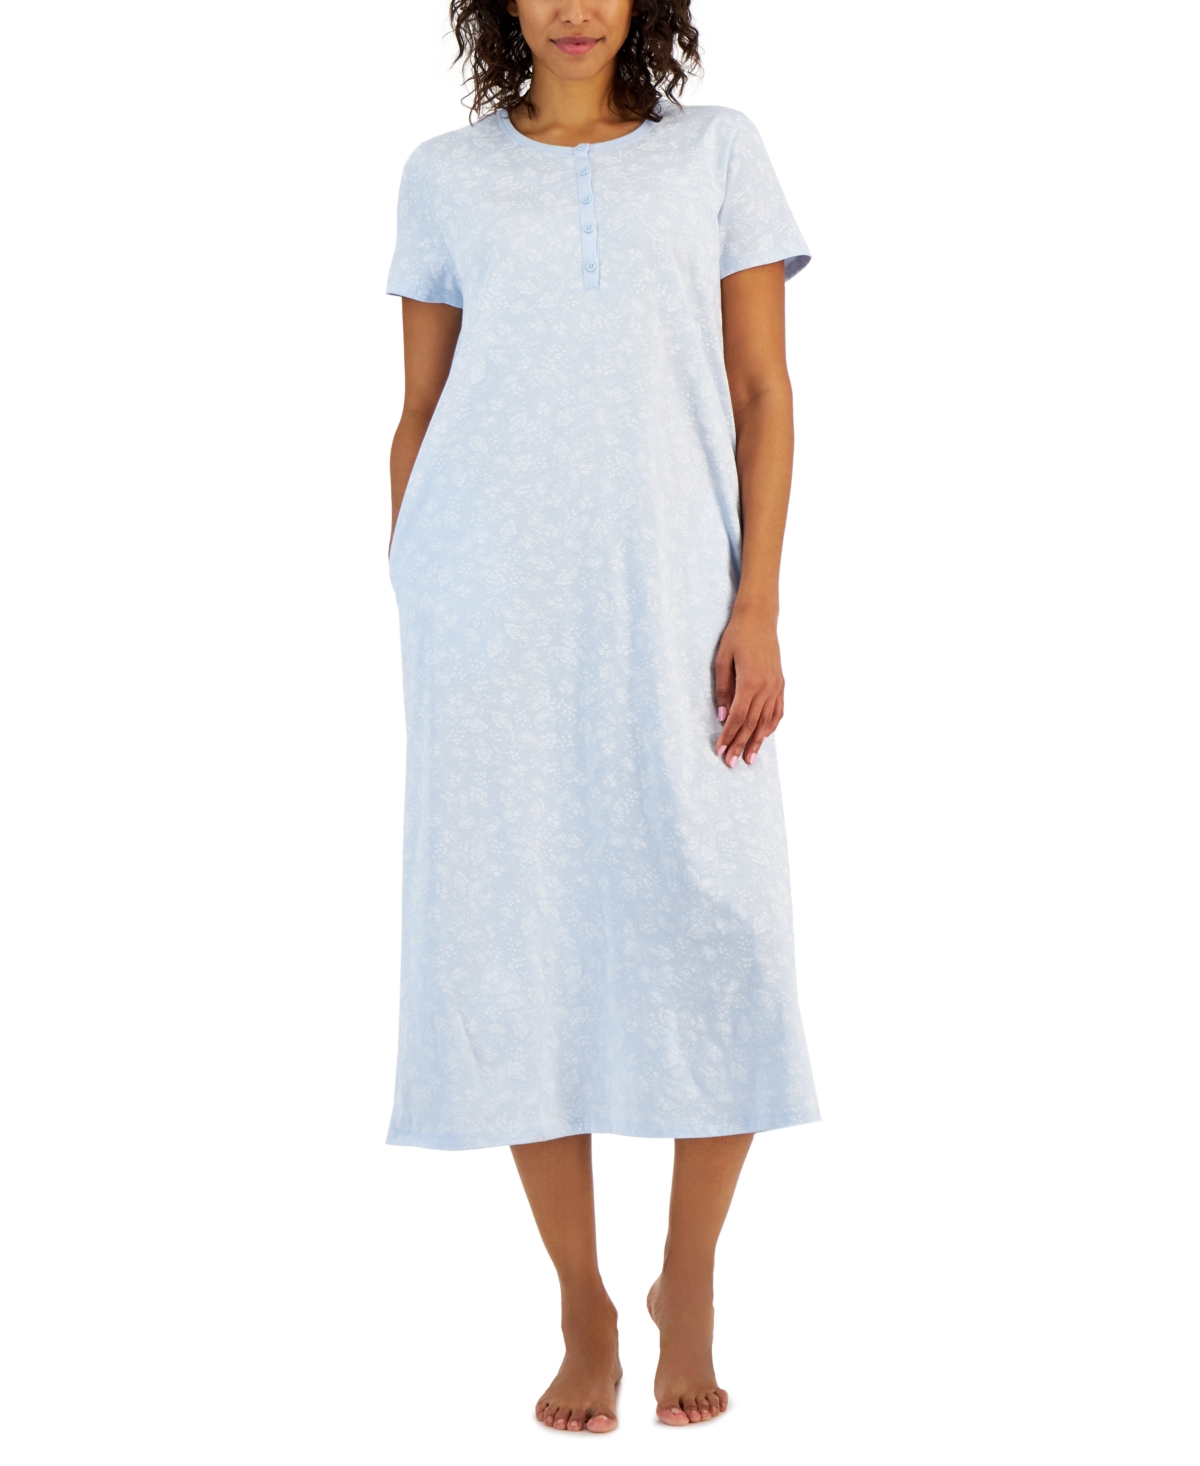 Women's Cotton Printed Nightgown, Created for Macy's - Polka Dots